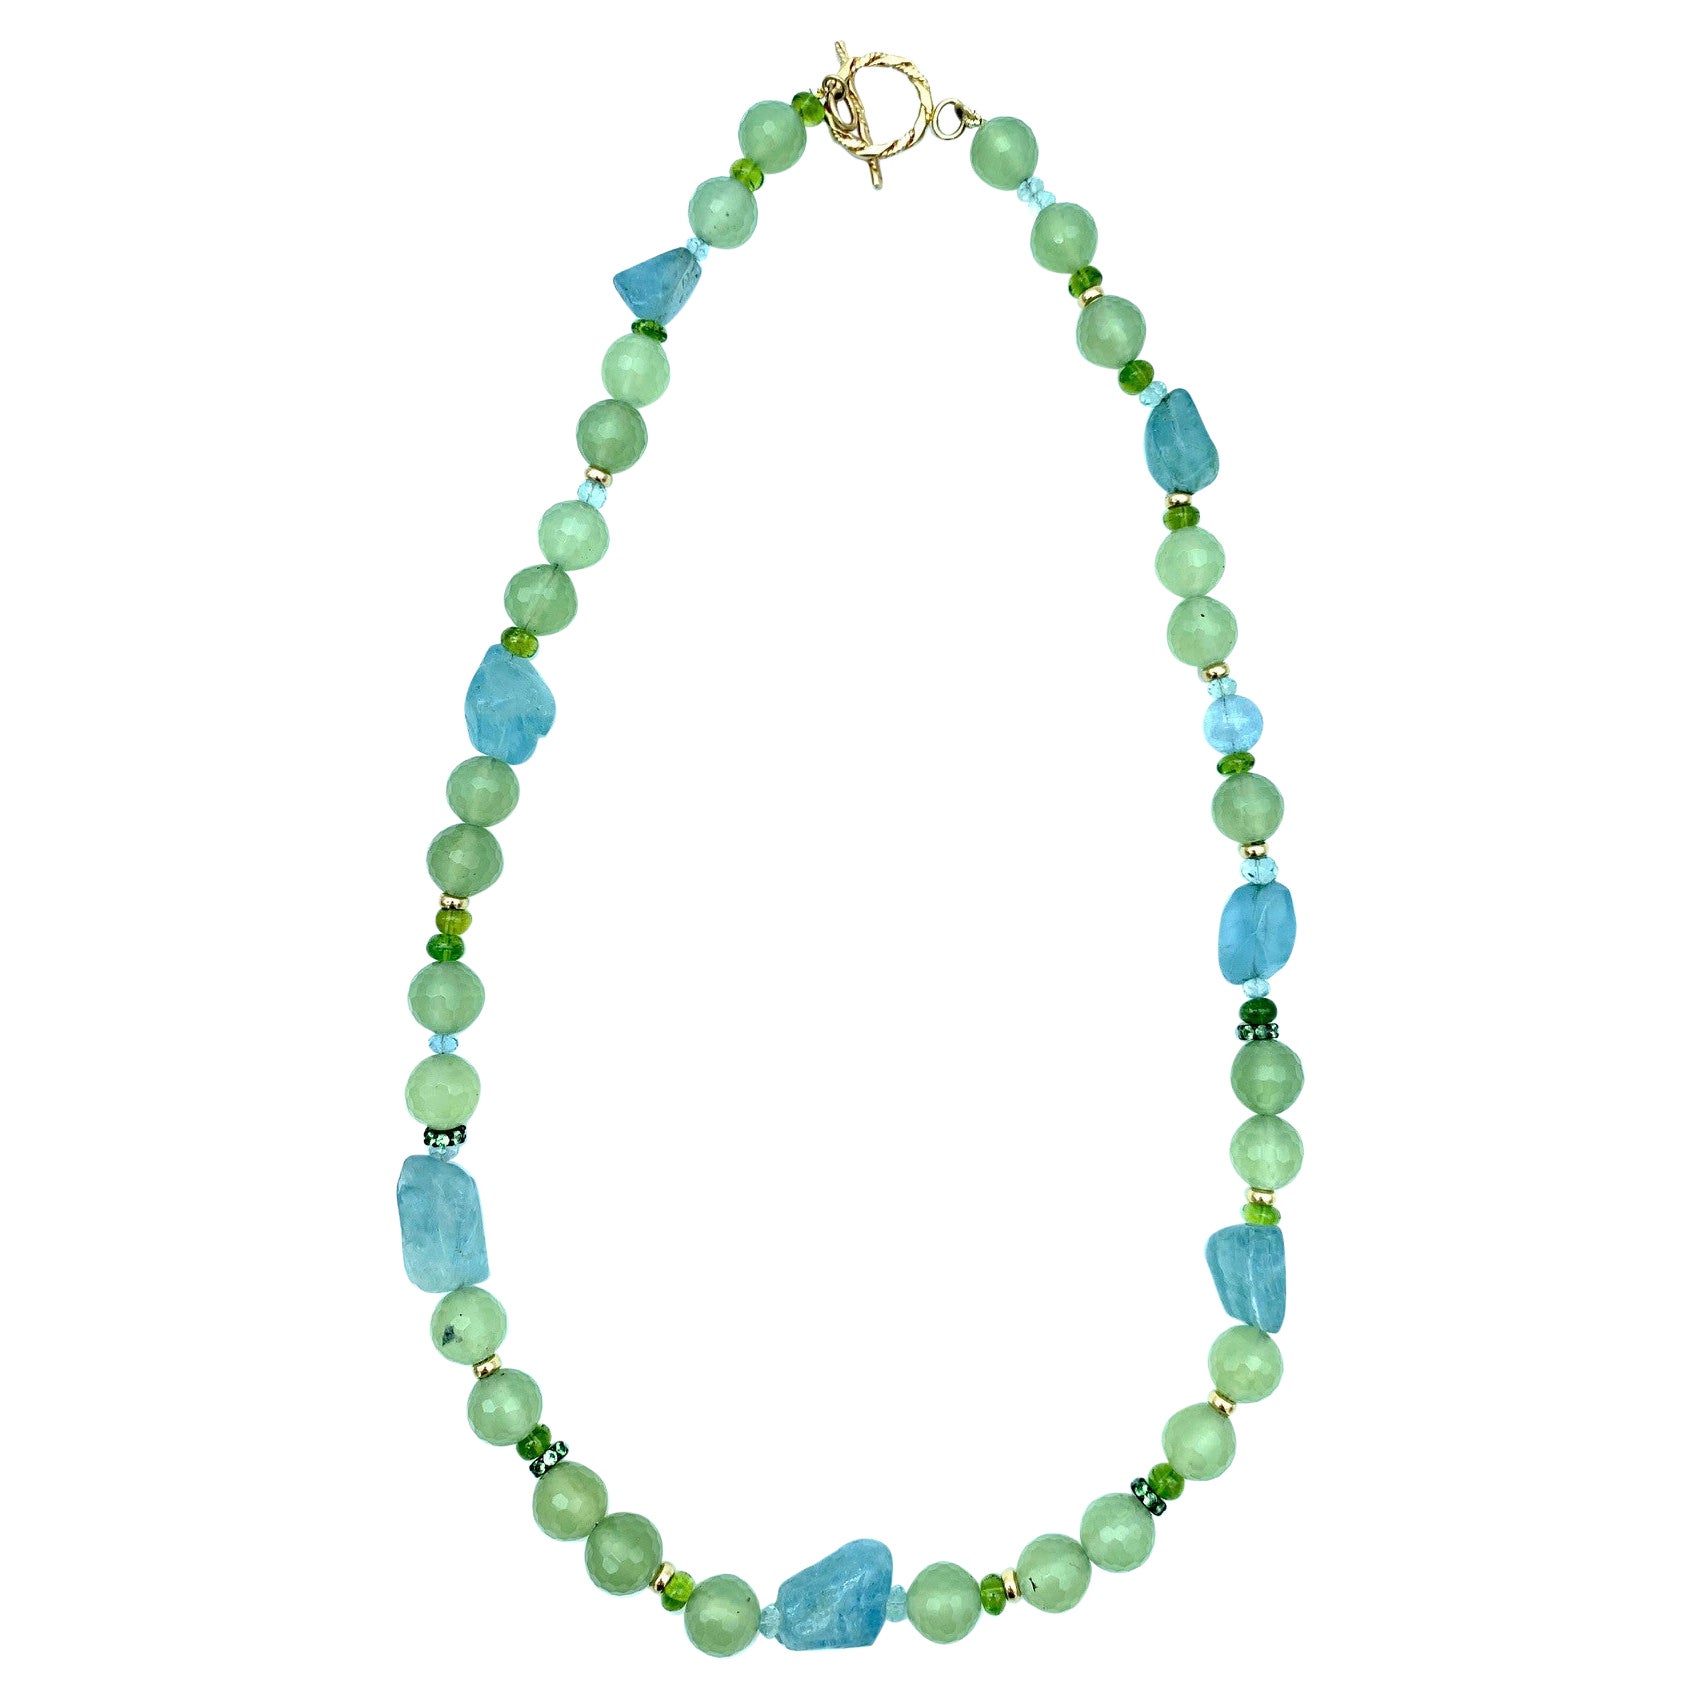 This fun and unique beaded necklace features an interesting collection of  pastel gemstones in a variety of shapes and sizes. Round, faceted prehnite beads are combined with freeform aquamarine 